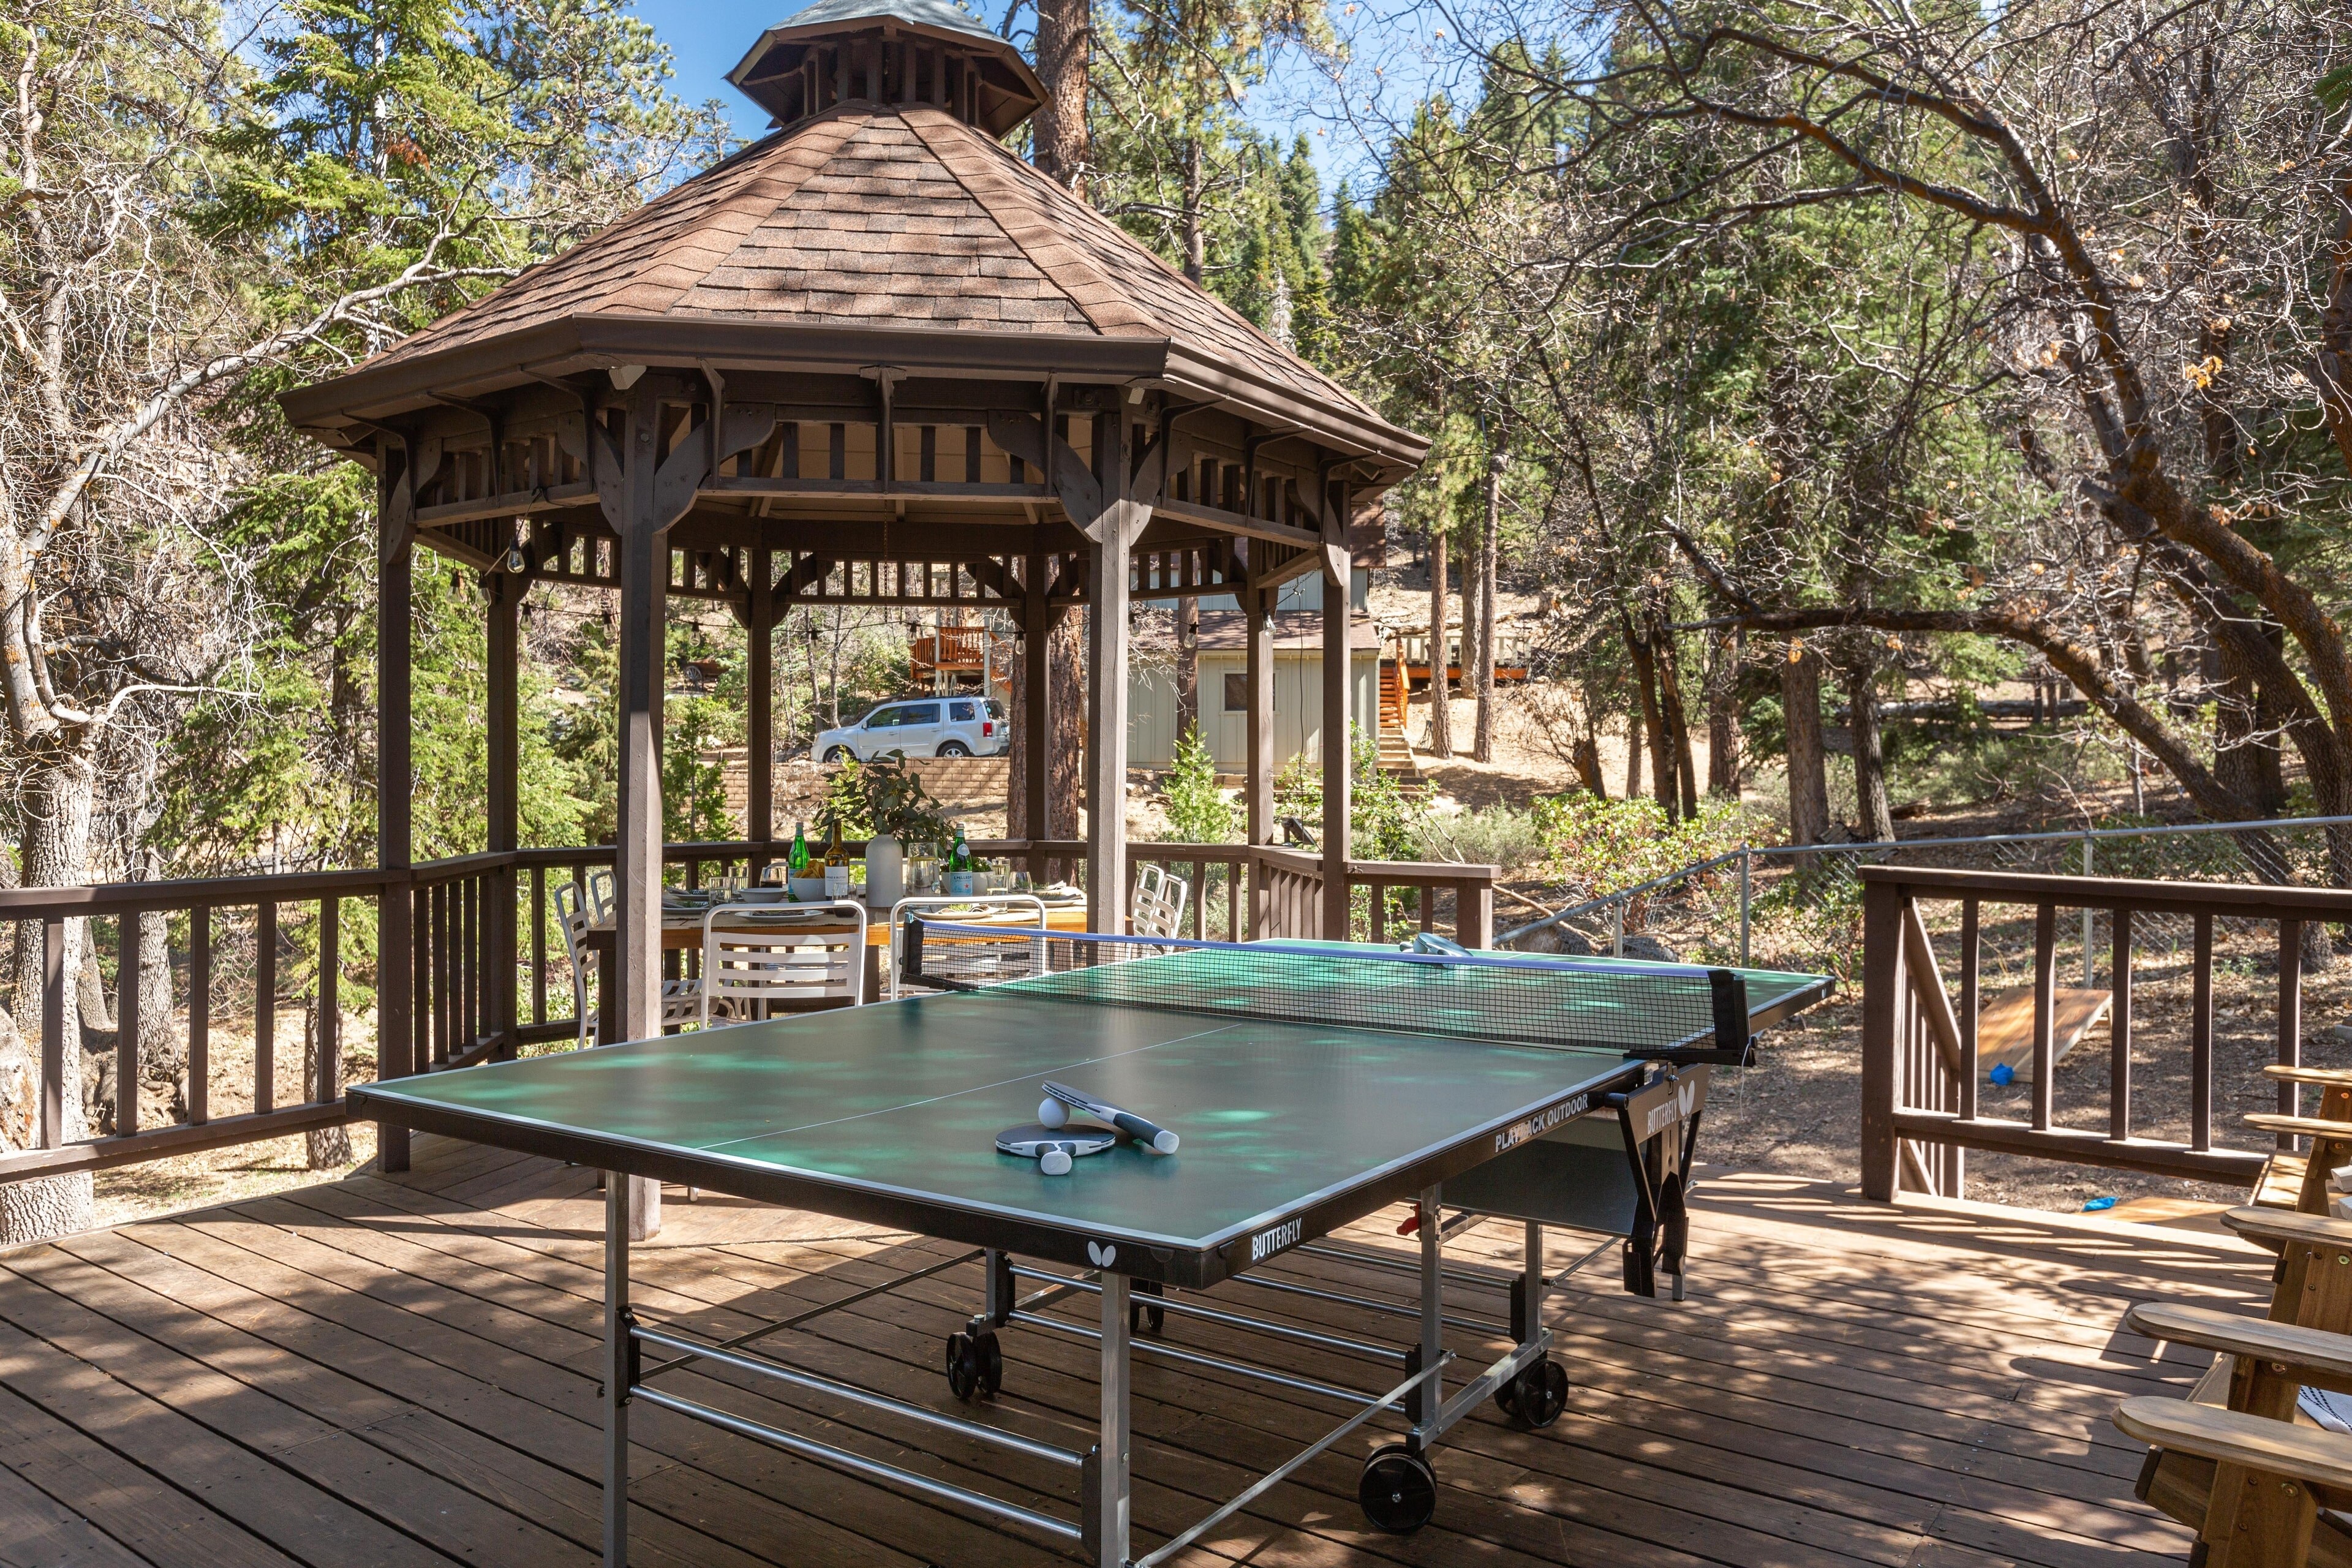 Your spacious deck comes equipped with a gazebo, ping pong table, and lounge chairs.